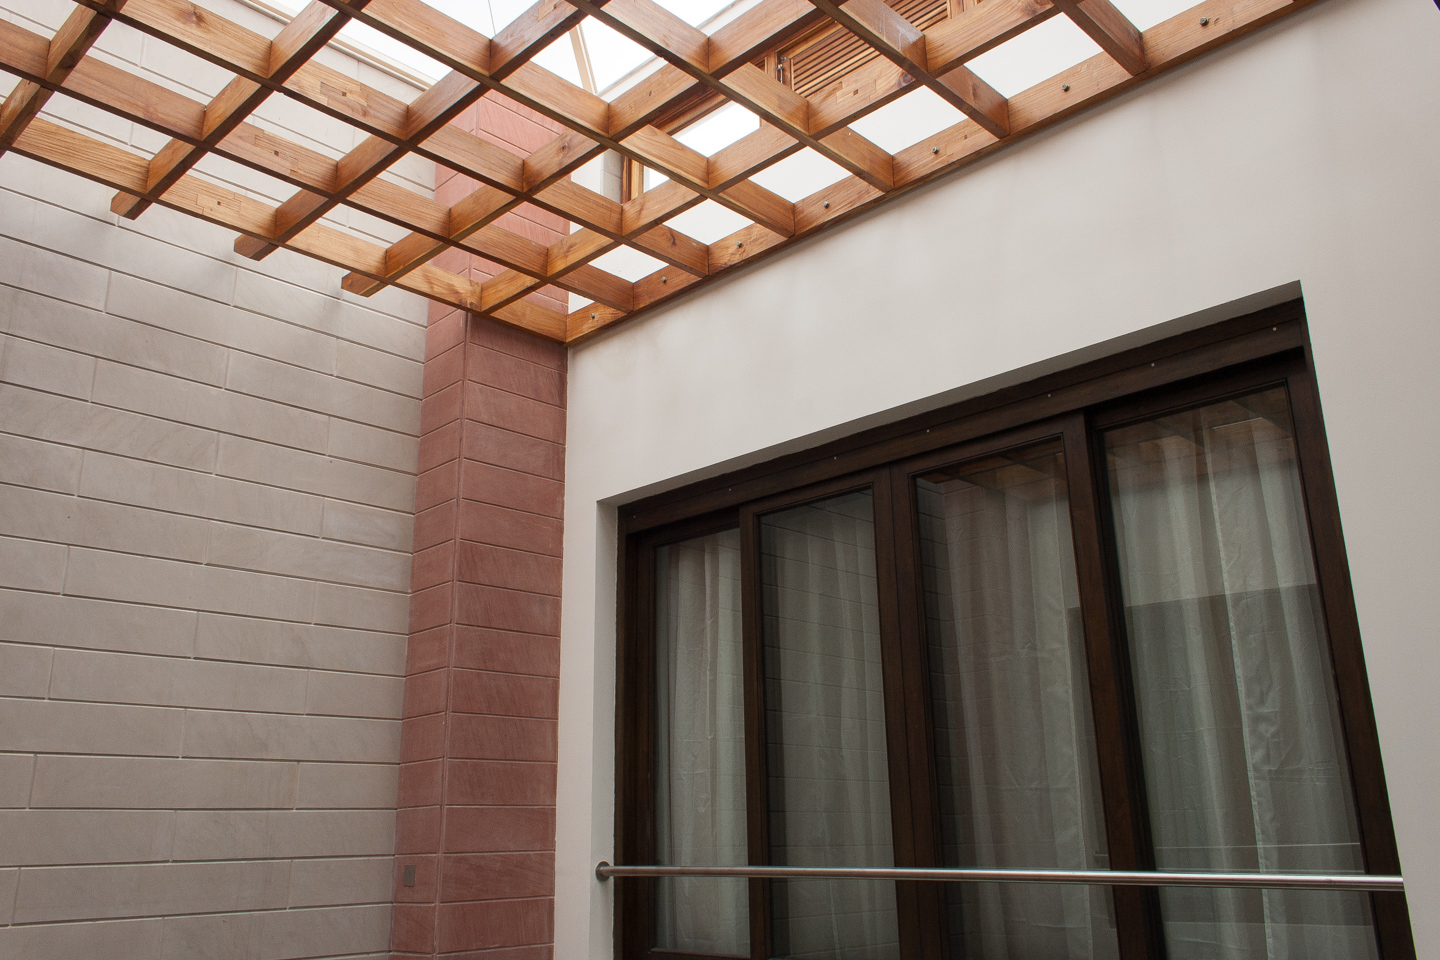 The courtyard with trellis and skylight